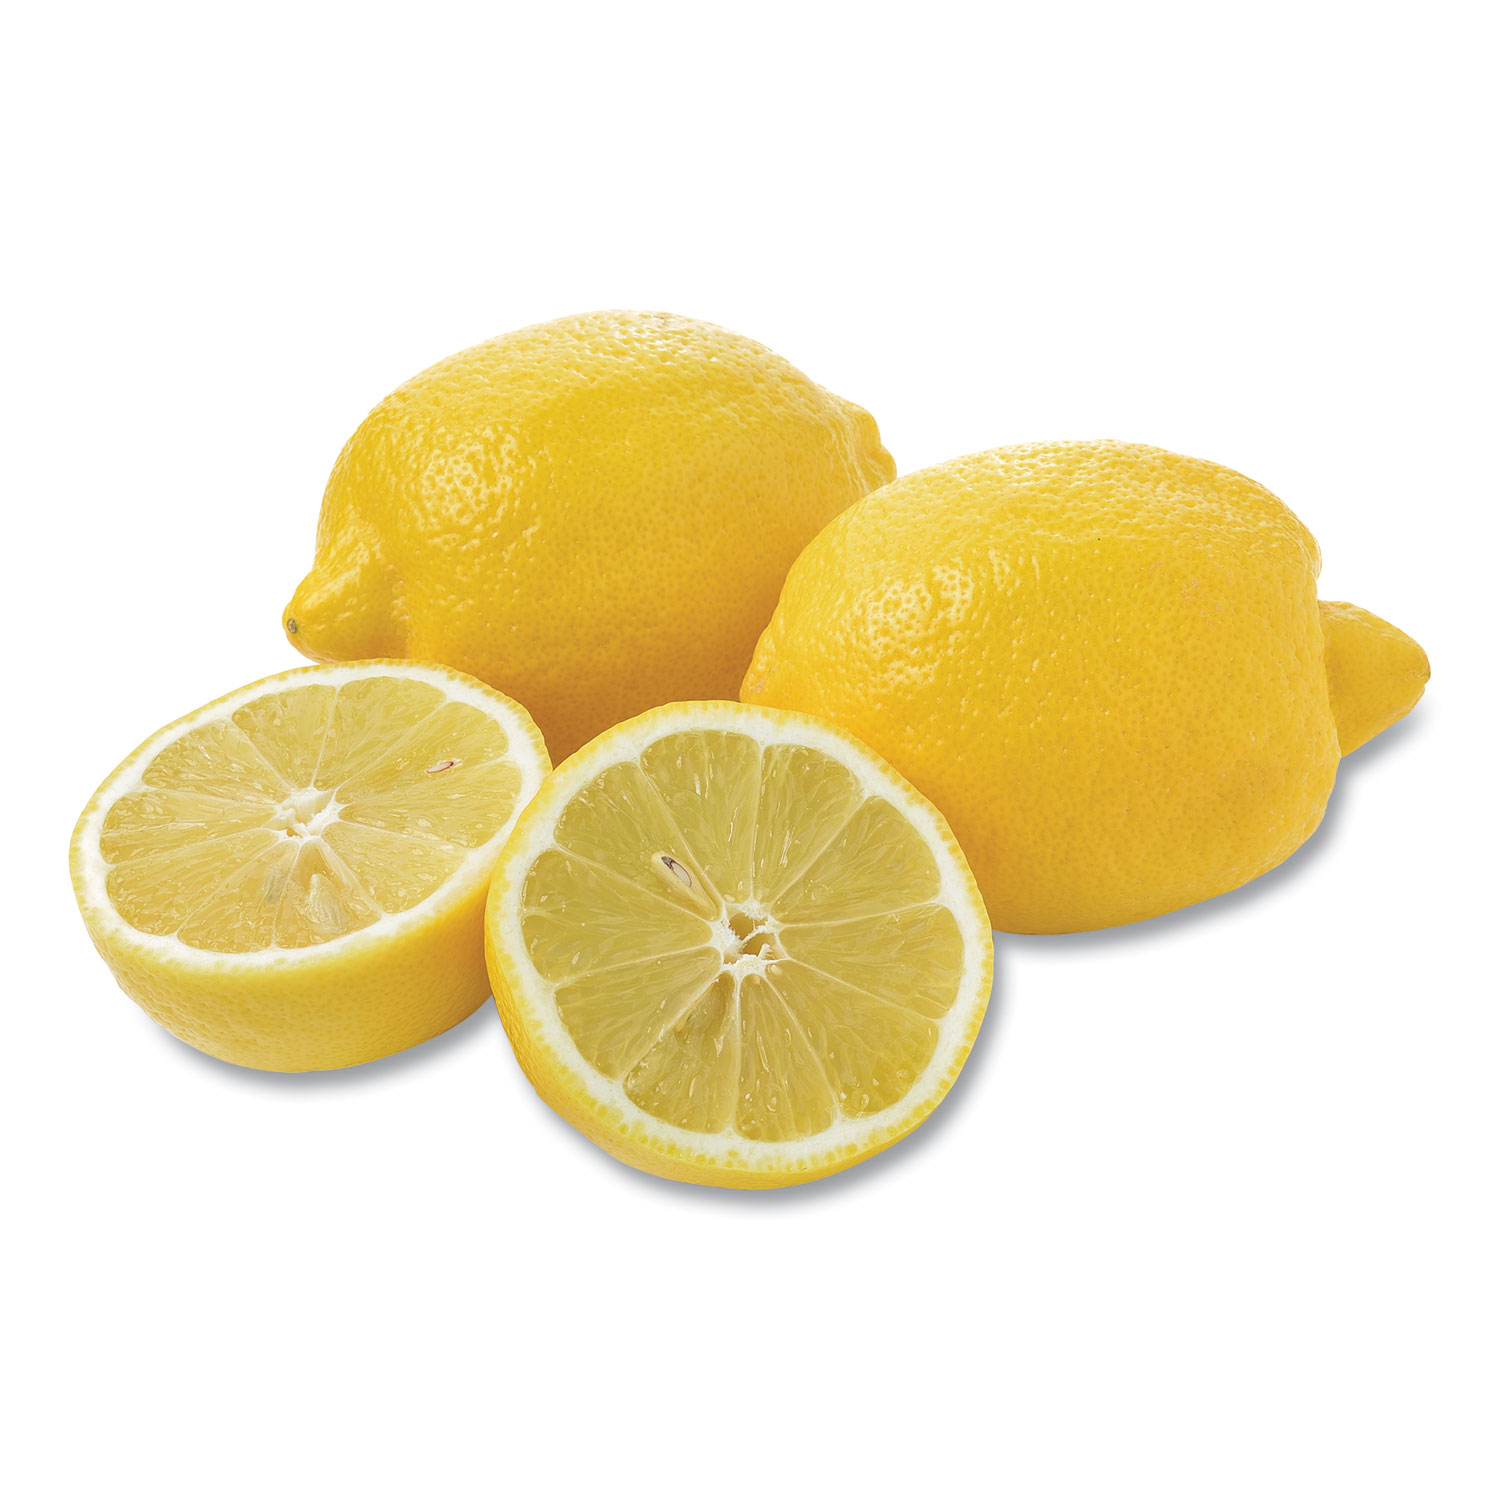  National Brand 11504 Fresh Lemons, 3 lbs, Free Delivery in 1-4 Business Days (GRR90000036) 